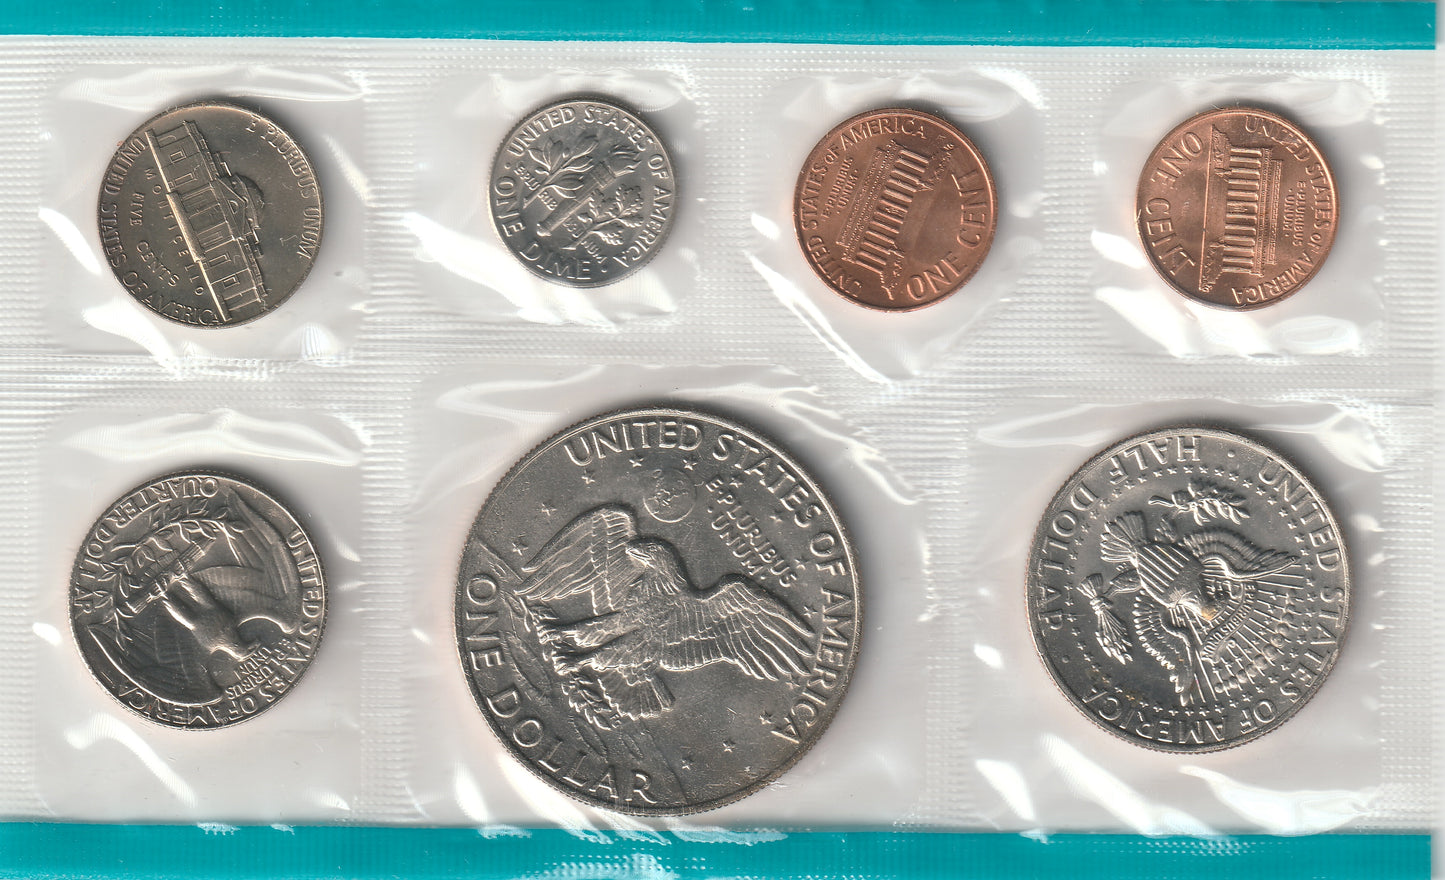 1974 United States Mint Uncirculated Coin Set